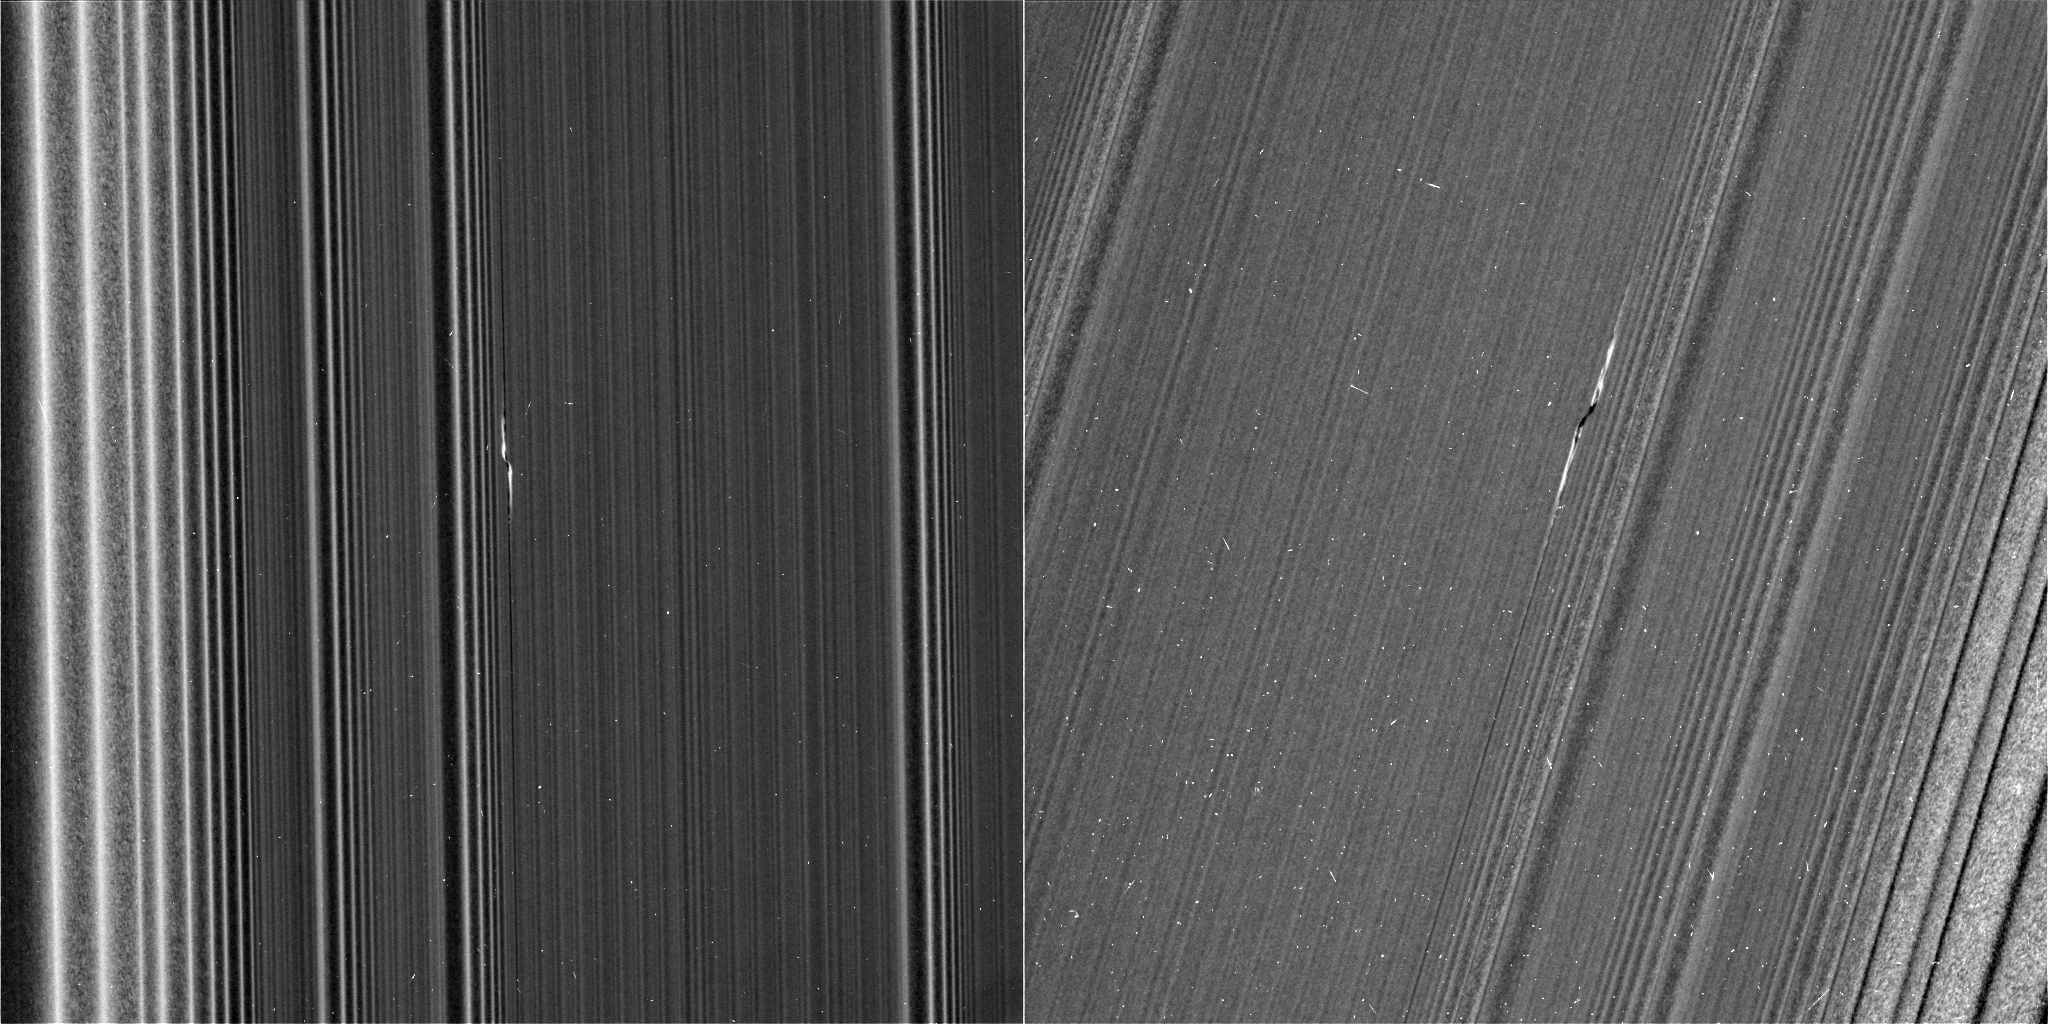 Propeller in Saturn's A Ring (Fig. B)